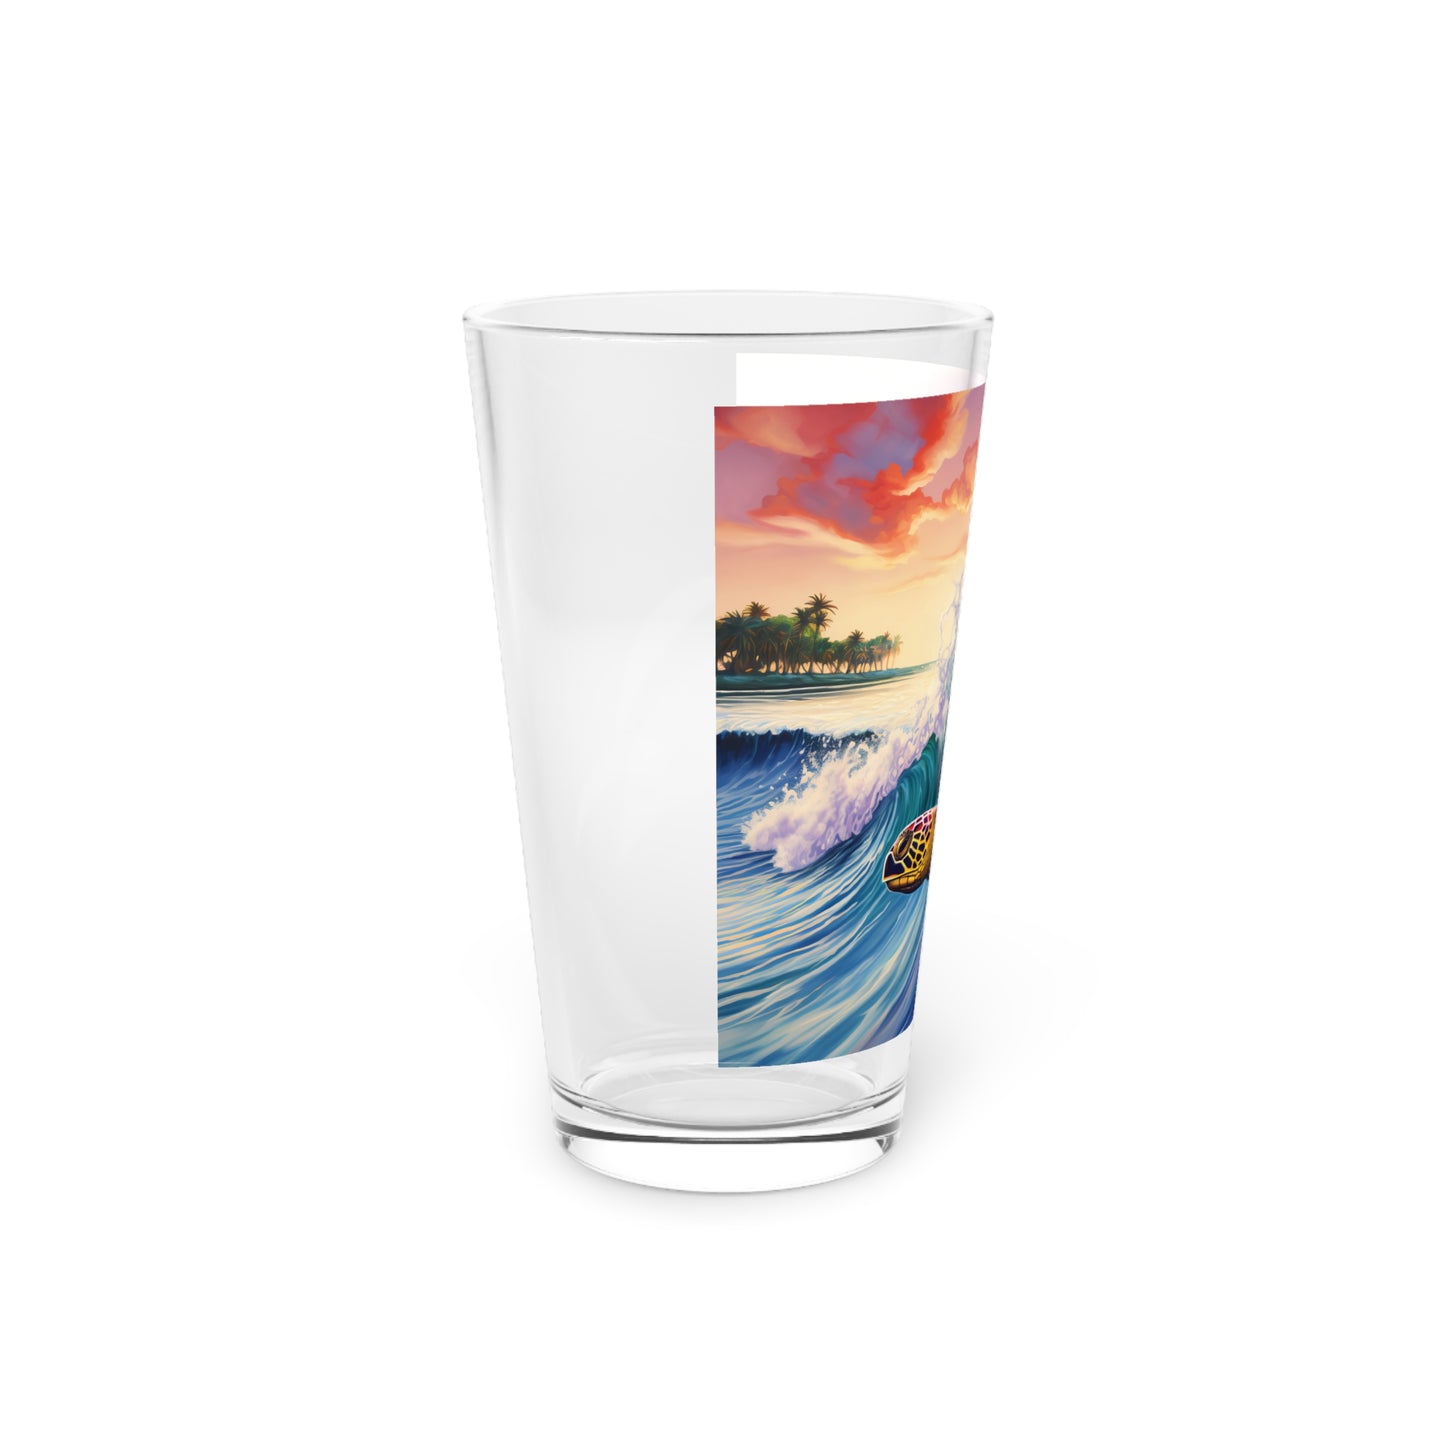 Experience the allure of Hawaiian waters with our Turtle Surfing Waves Pint Glass. Waves Design #009 graces this 16oz glass, exclusively crafted by Stashbox, capturing the grace of turtles riding the vibrant waves.